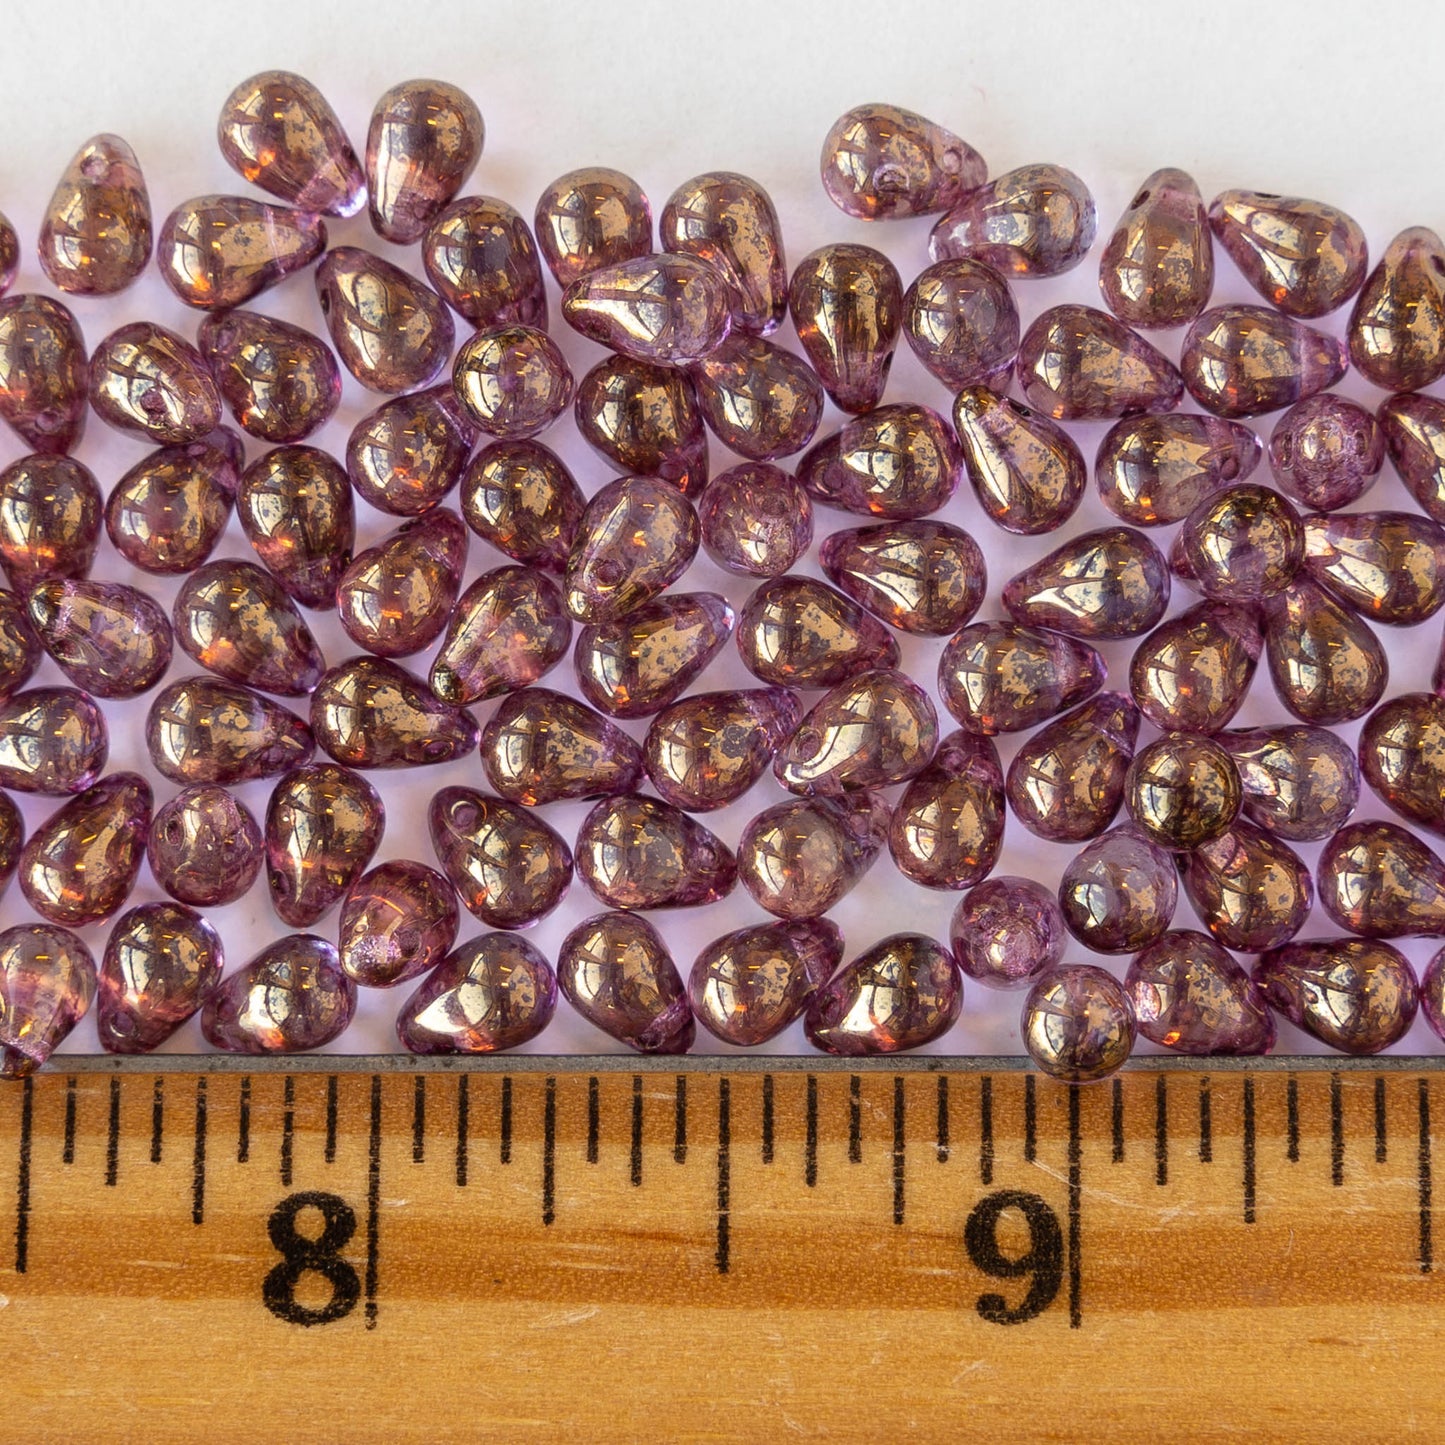 4x6mm Glass Teardrop Beads - Light Lavender with Gold Shimmer - 100 Beads